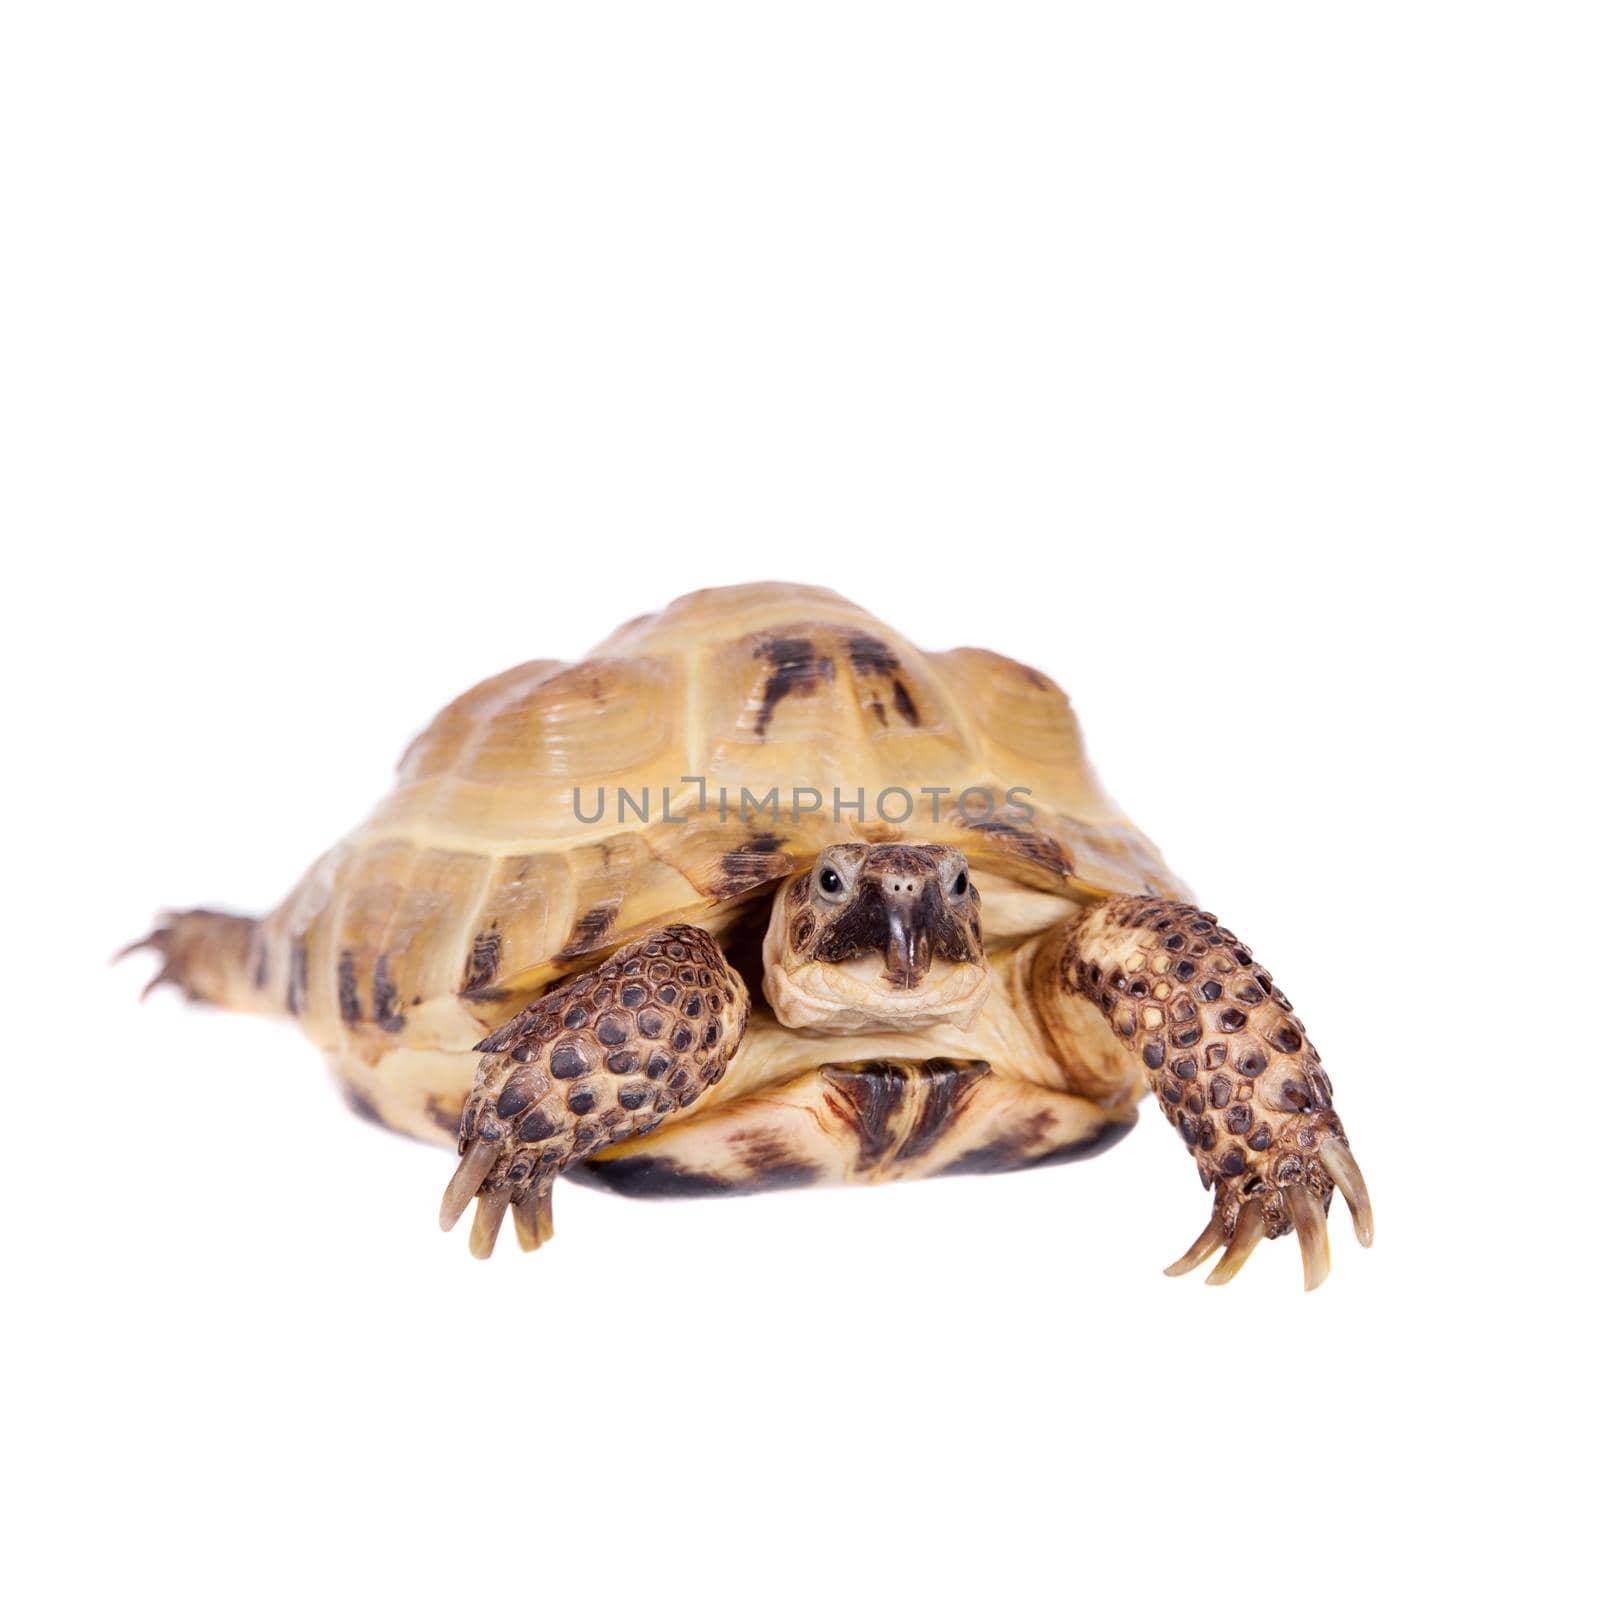 Russian or Central Asian tortoise, Agrionemys horsfieldii